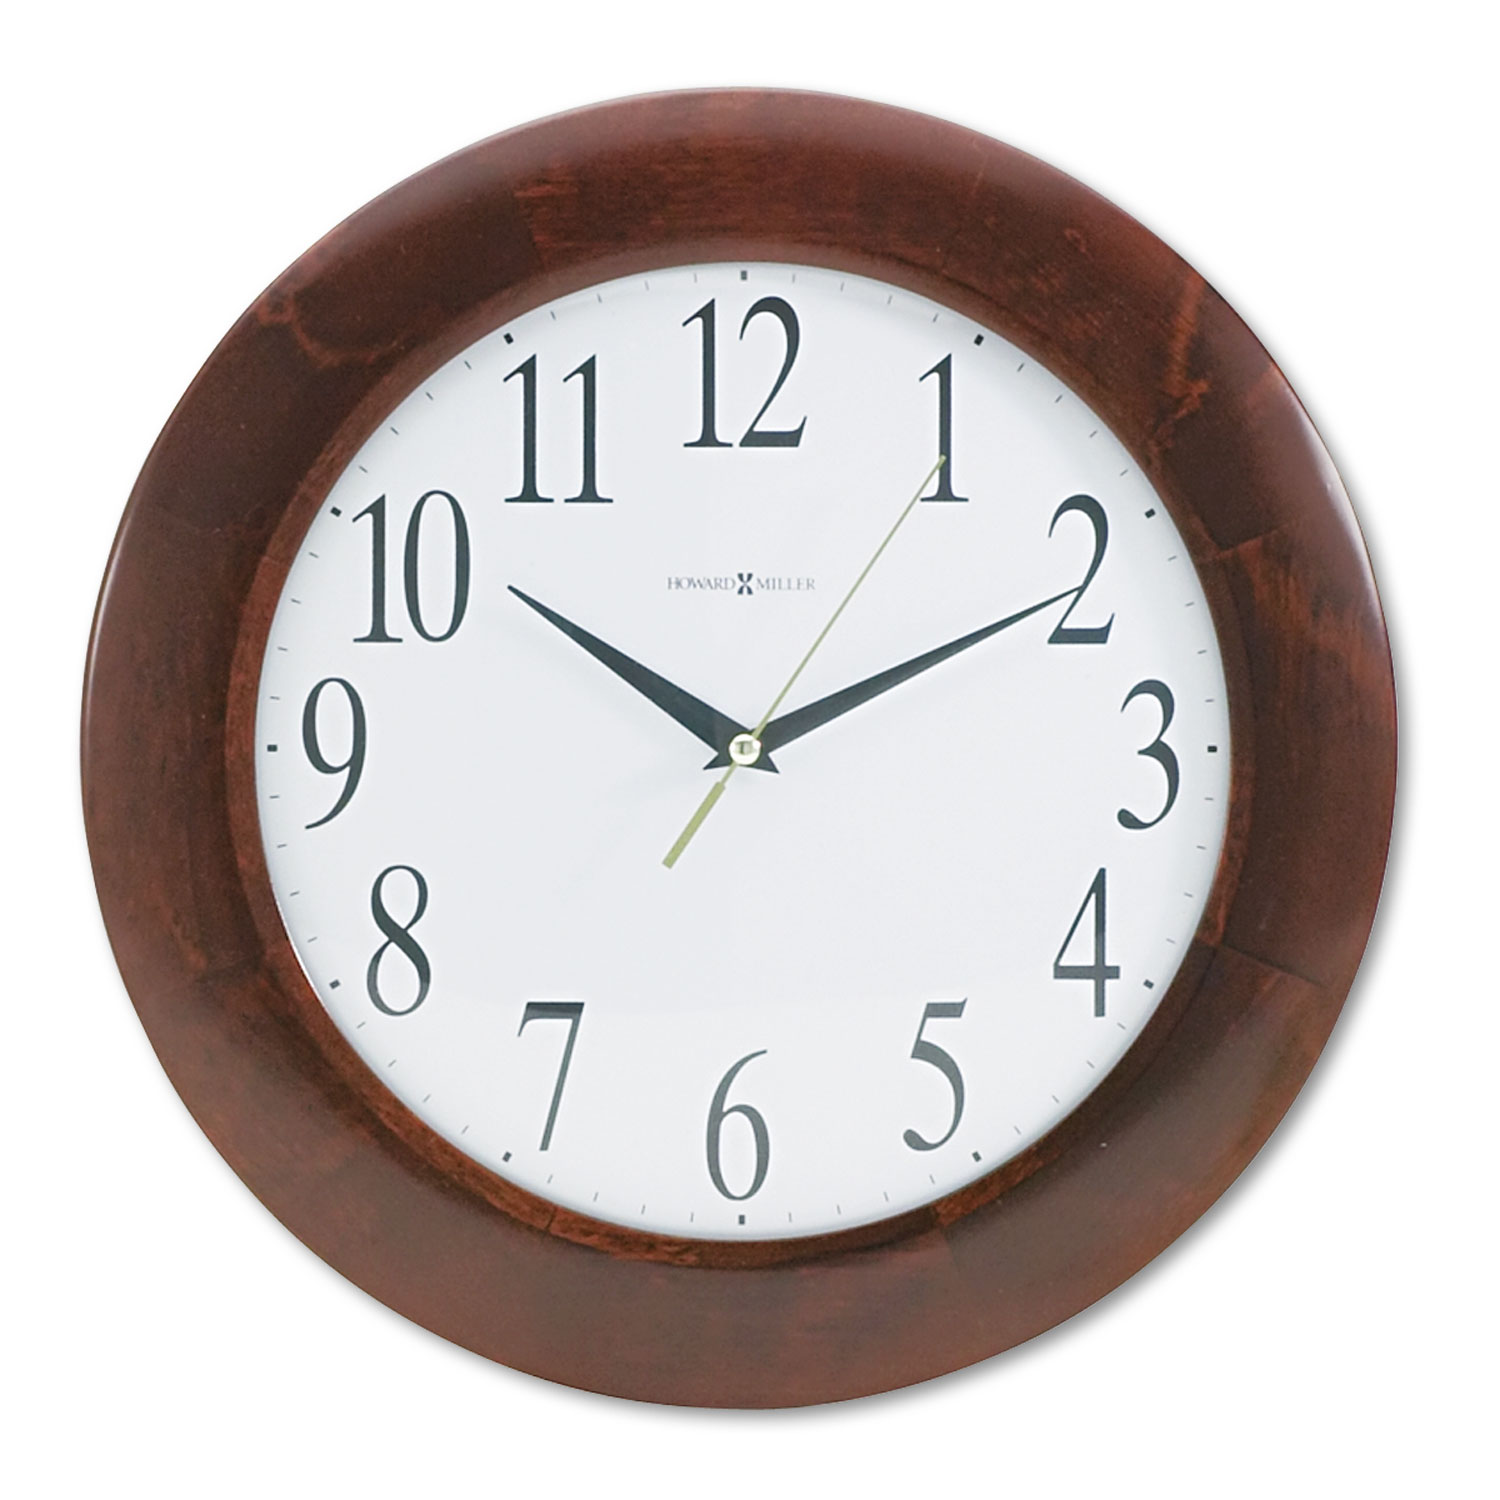  Howard Miller 625-214 Corporate Wall Clock, 12.75 Overall Diameter, Cherry Case, 1 AA (sold separately) (MIL625214) 